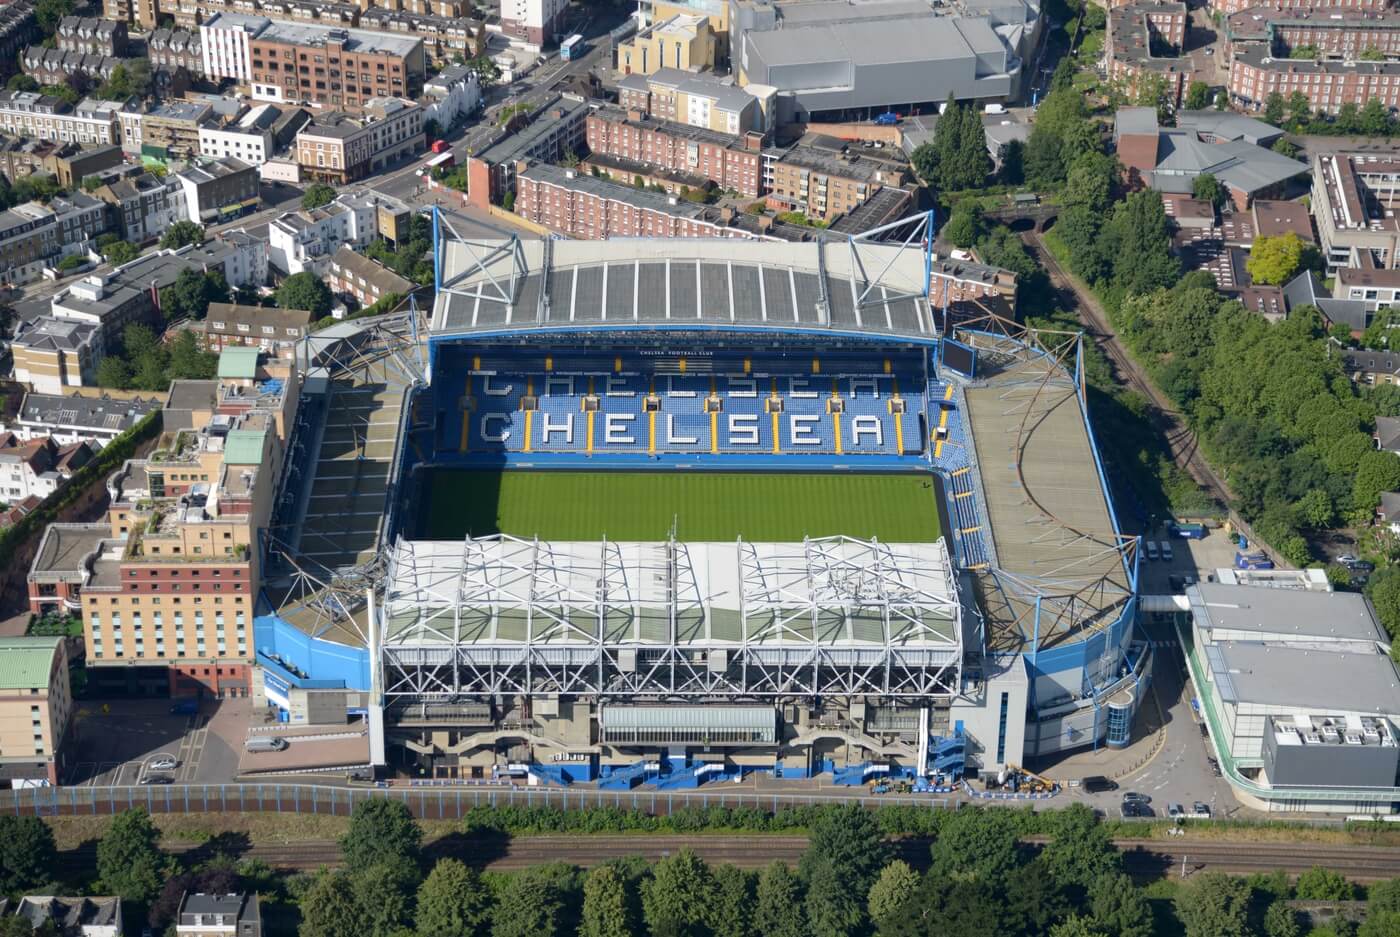 Jul 12, 2012; London, UNITED KINGDOM; Aerial view of the Stamford Bridge stadium. The venue is the home facility for the Chlesea football club of the English Premier League. Mandatory Credit: Kirby Lee/Image of Sport-USA TODAY Sports